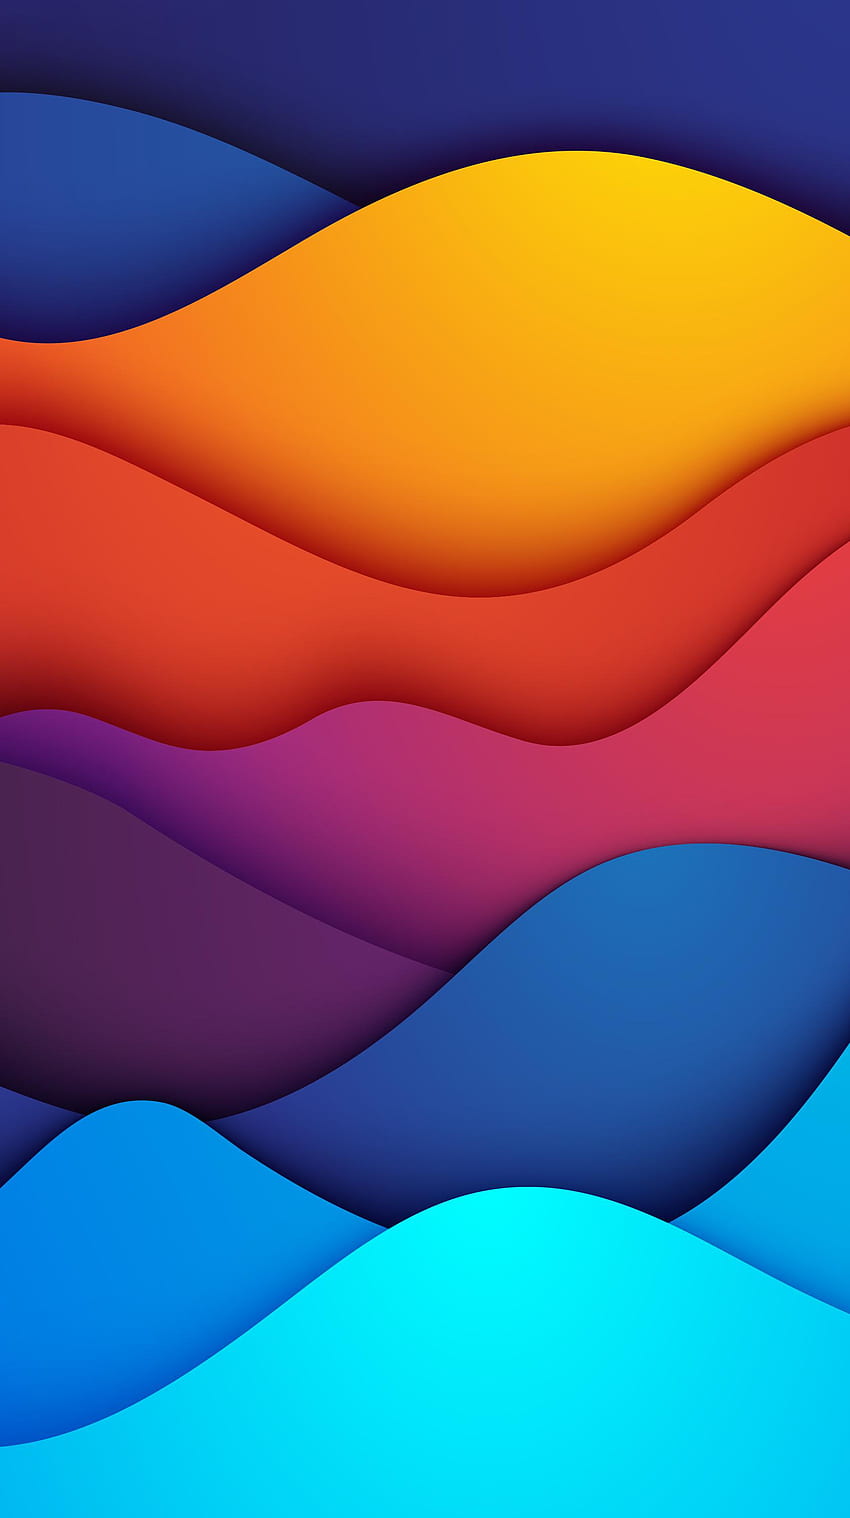 100+] Samsung Galaxy S22 Wallpapers | Wallpapers.com